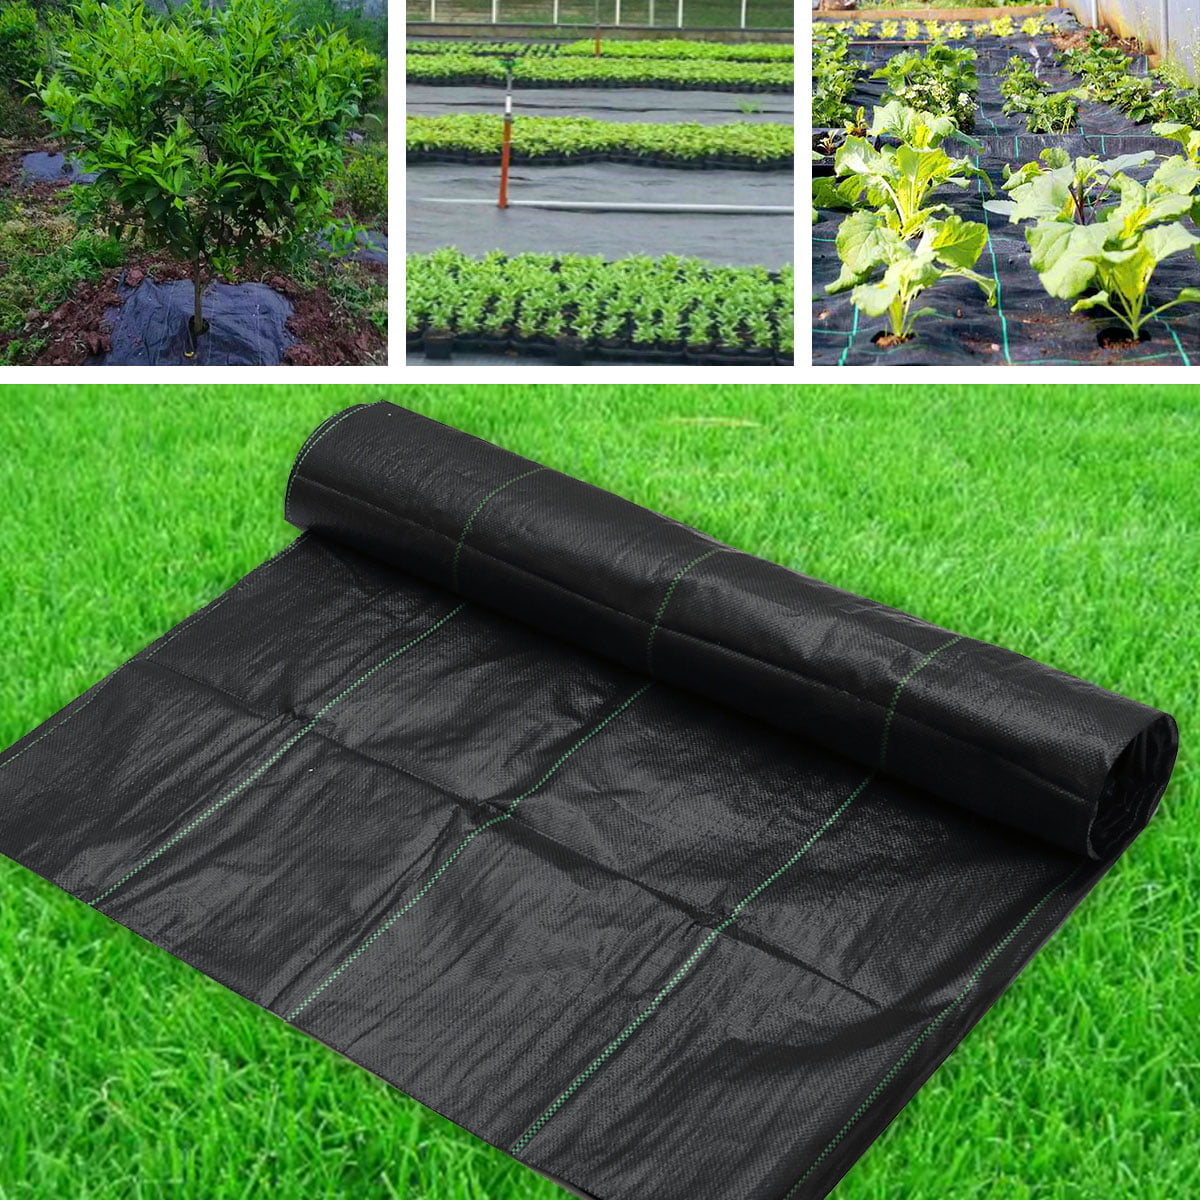 ANKMM Garden Weed Barrier Landscape Fabric Durable & Heavy-Duty Weed Block Gardening Mat Weed Contro 3ft x 50ft 